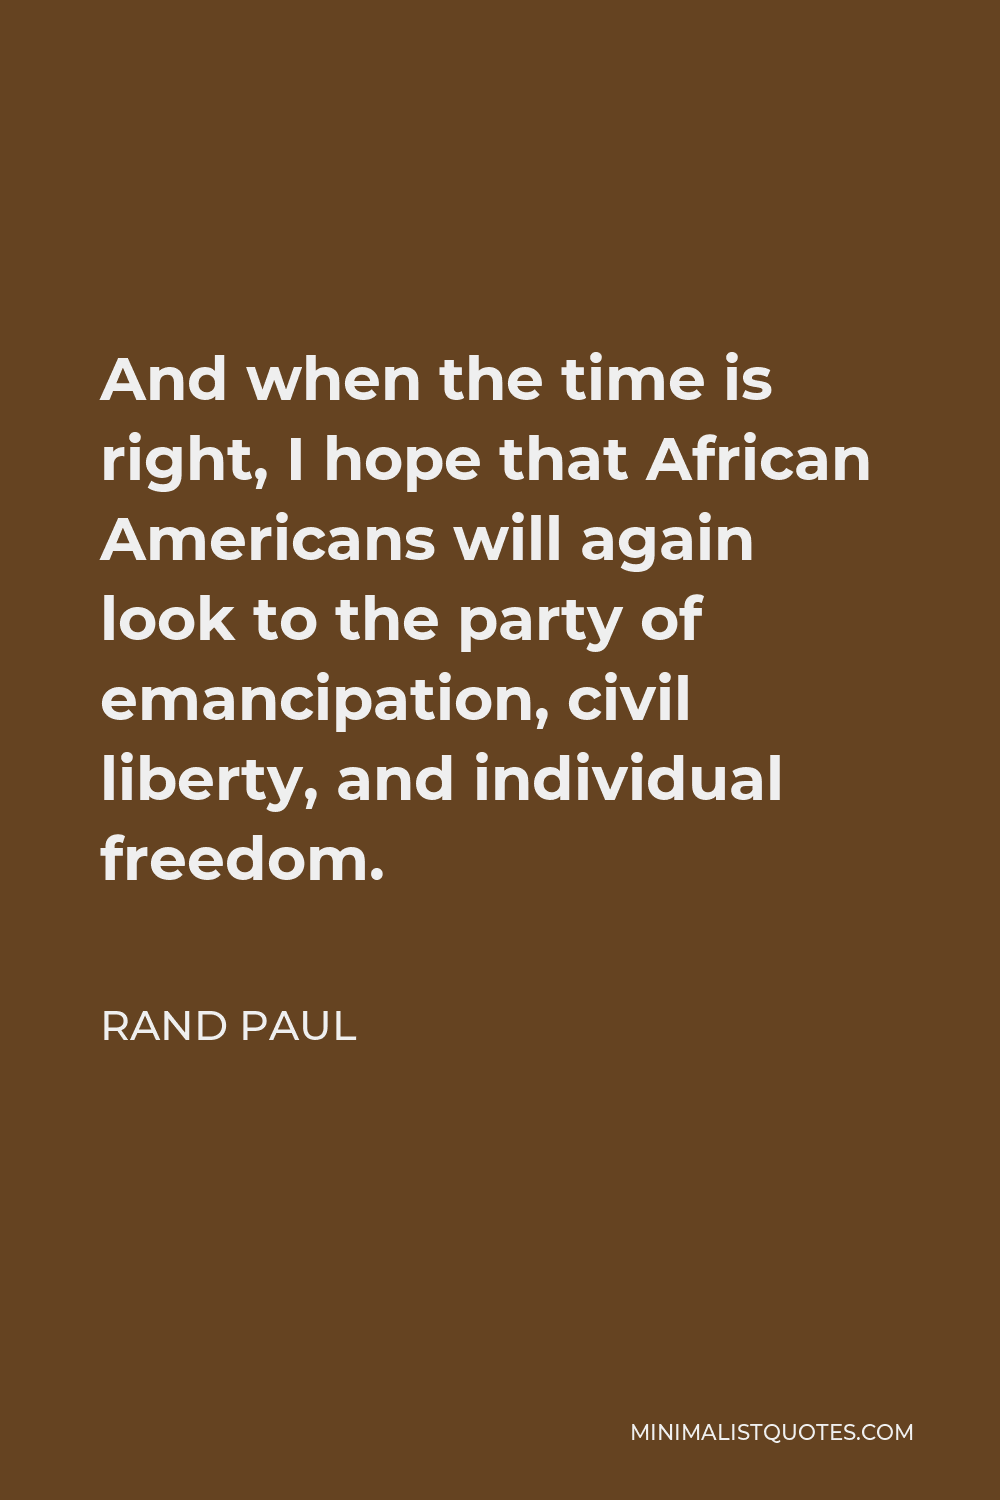 Rand Paul Quote - And when the time is right, I hope that African Americans will again look to the party of emancipation, civil liberty, and individual freedom.